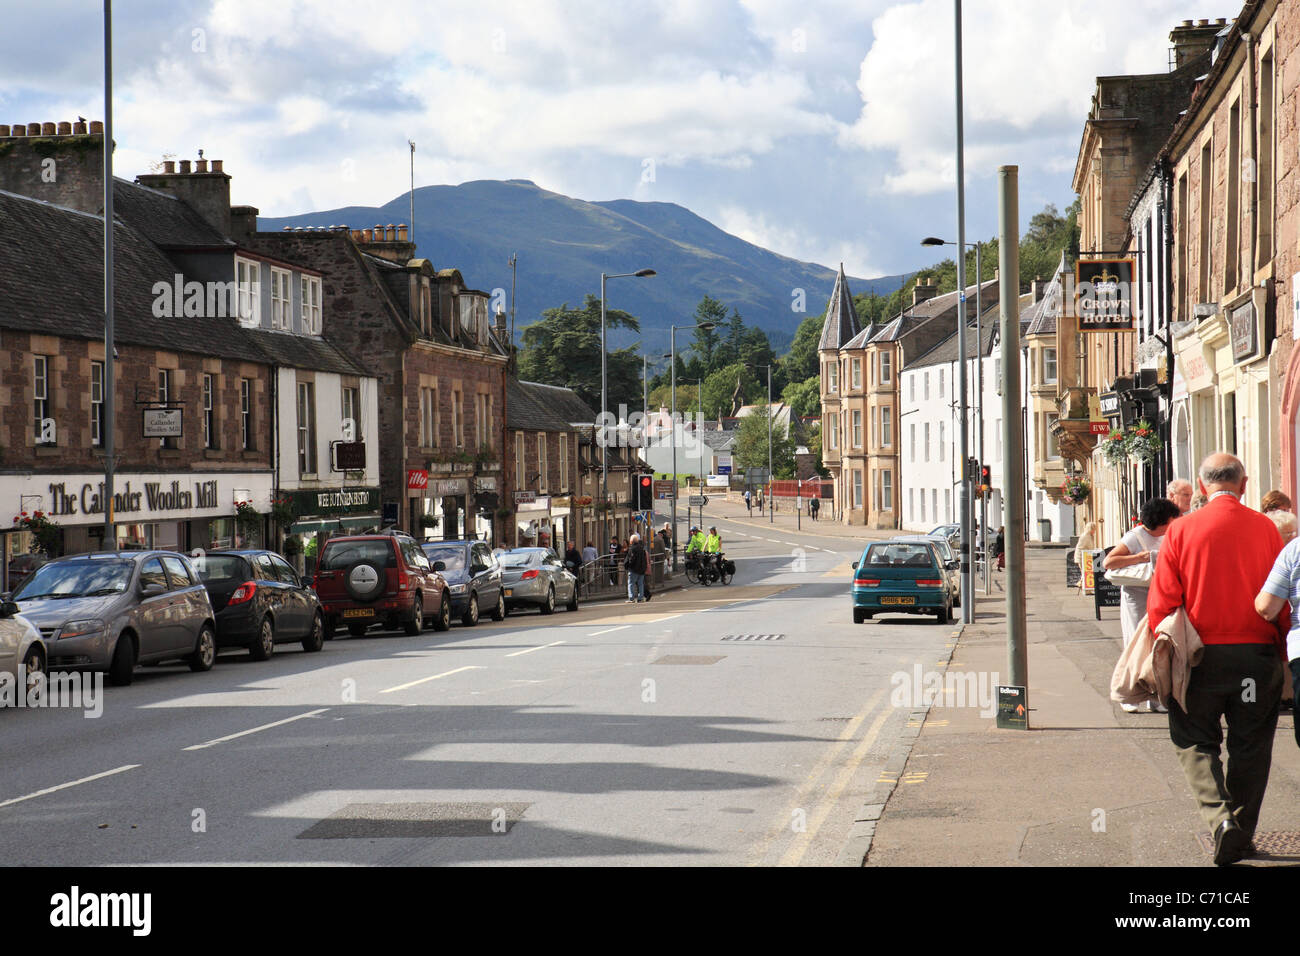 A view along the Main Street in Callander, Perthshire, Scotland, UK Stock Photo